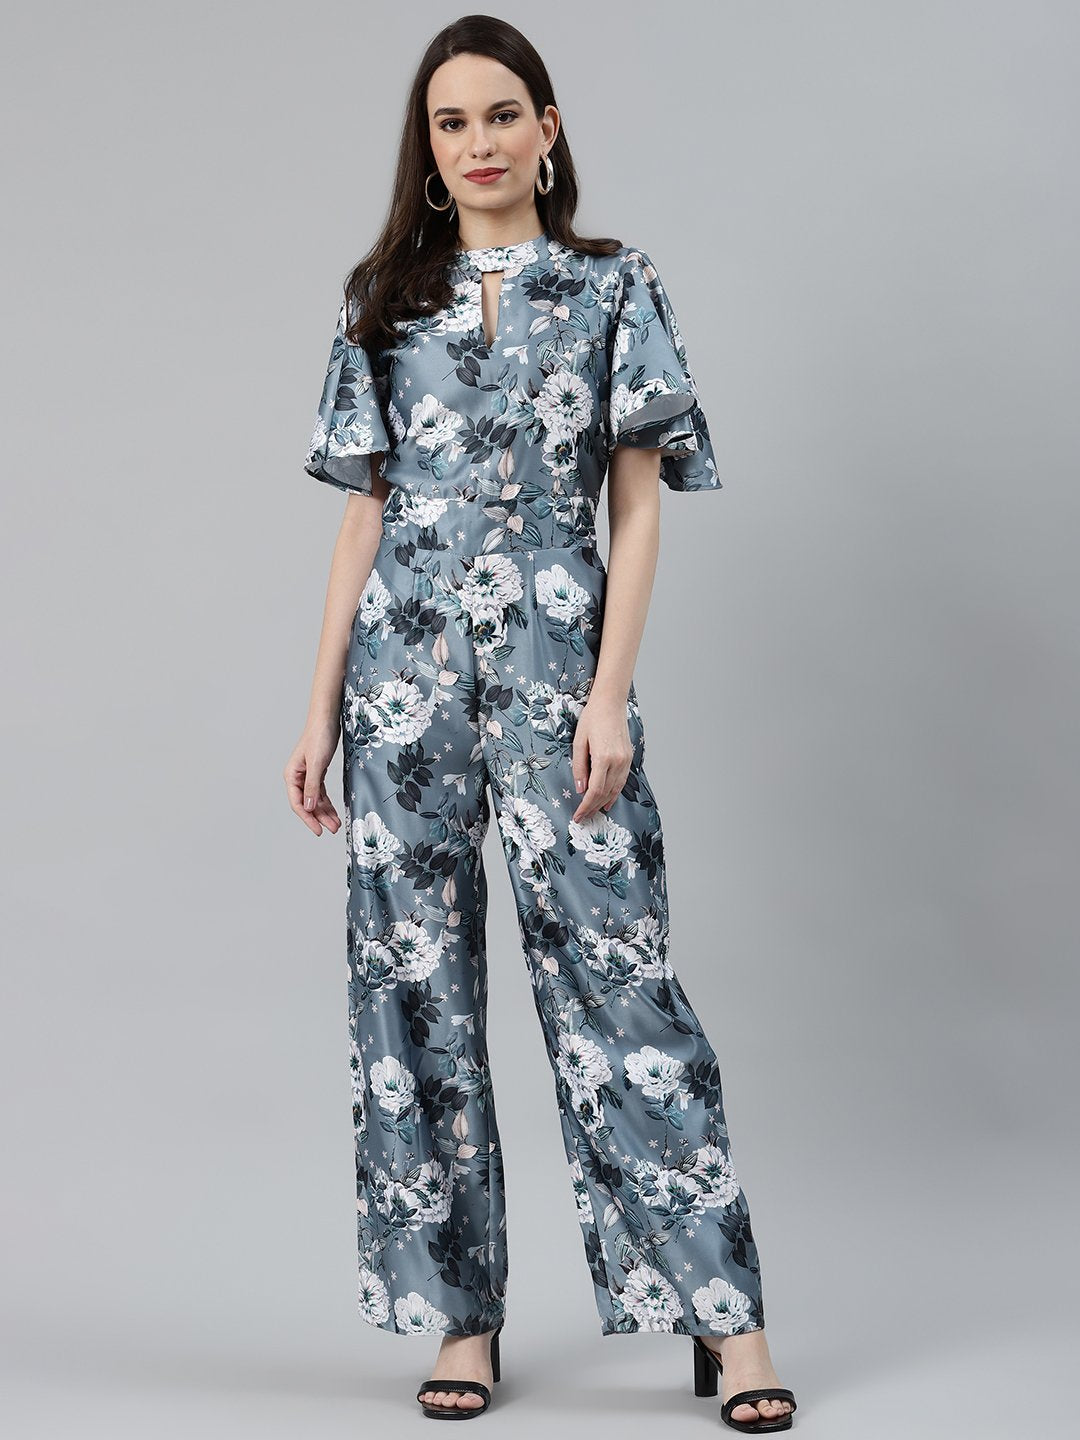 Women's Grey & Off-White Printed Keyhole Neck Flared Sleeves Basic Jumpsuit - Jompers